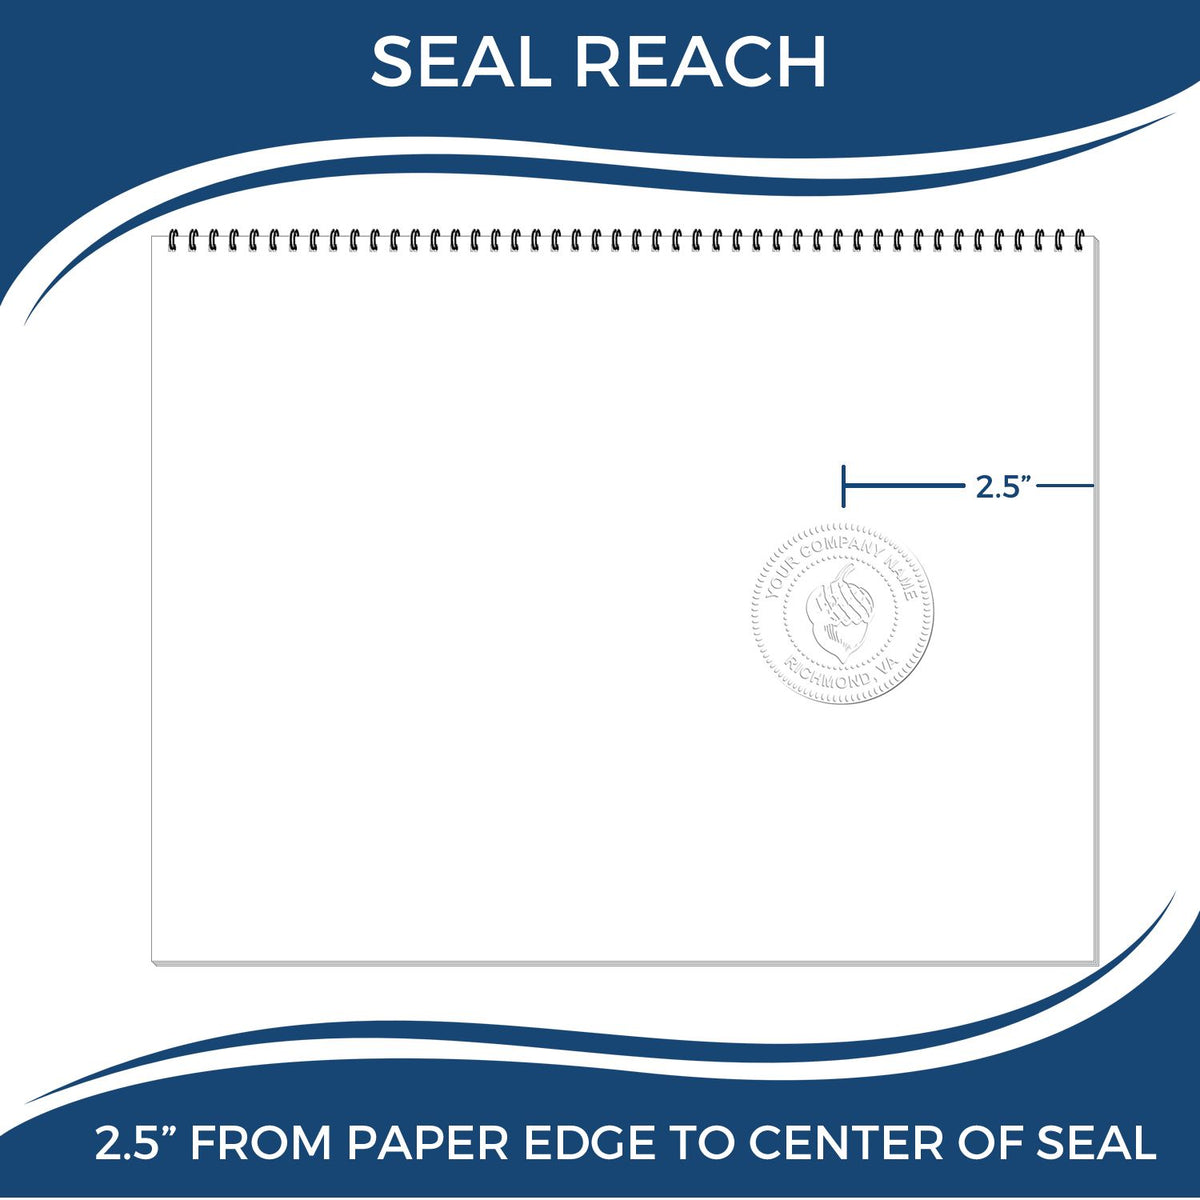 An infographic showing the seal reach which is represented by a ruler and a miniature seal image of the Long Reach District of Columbia Geology Seal